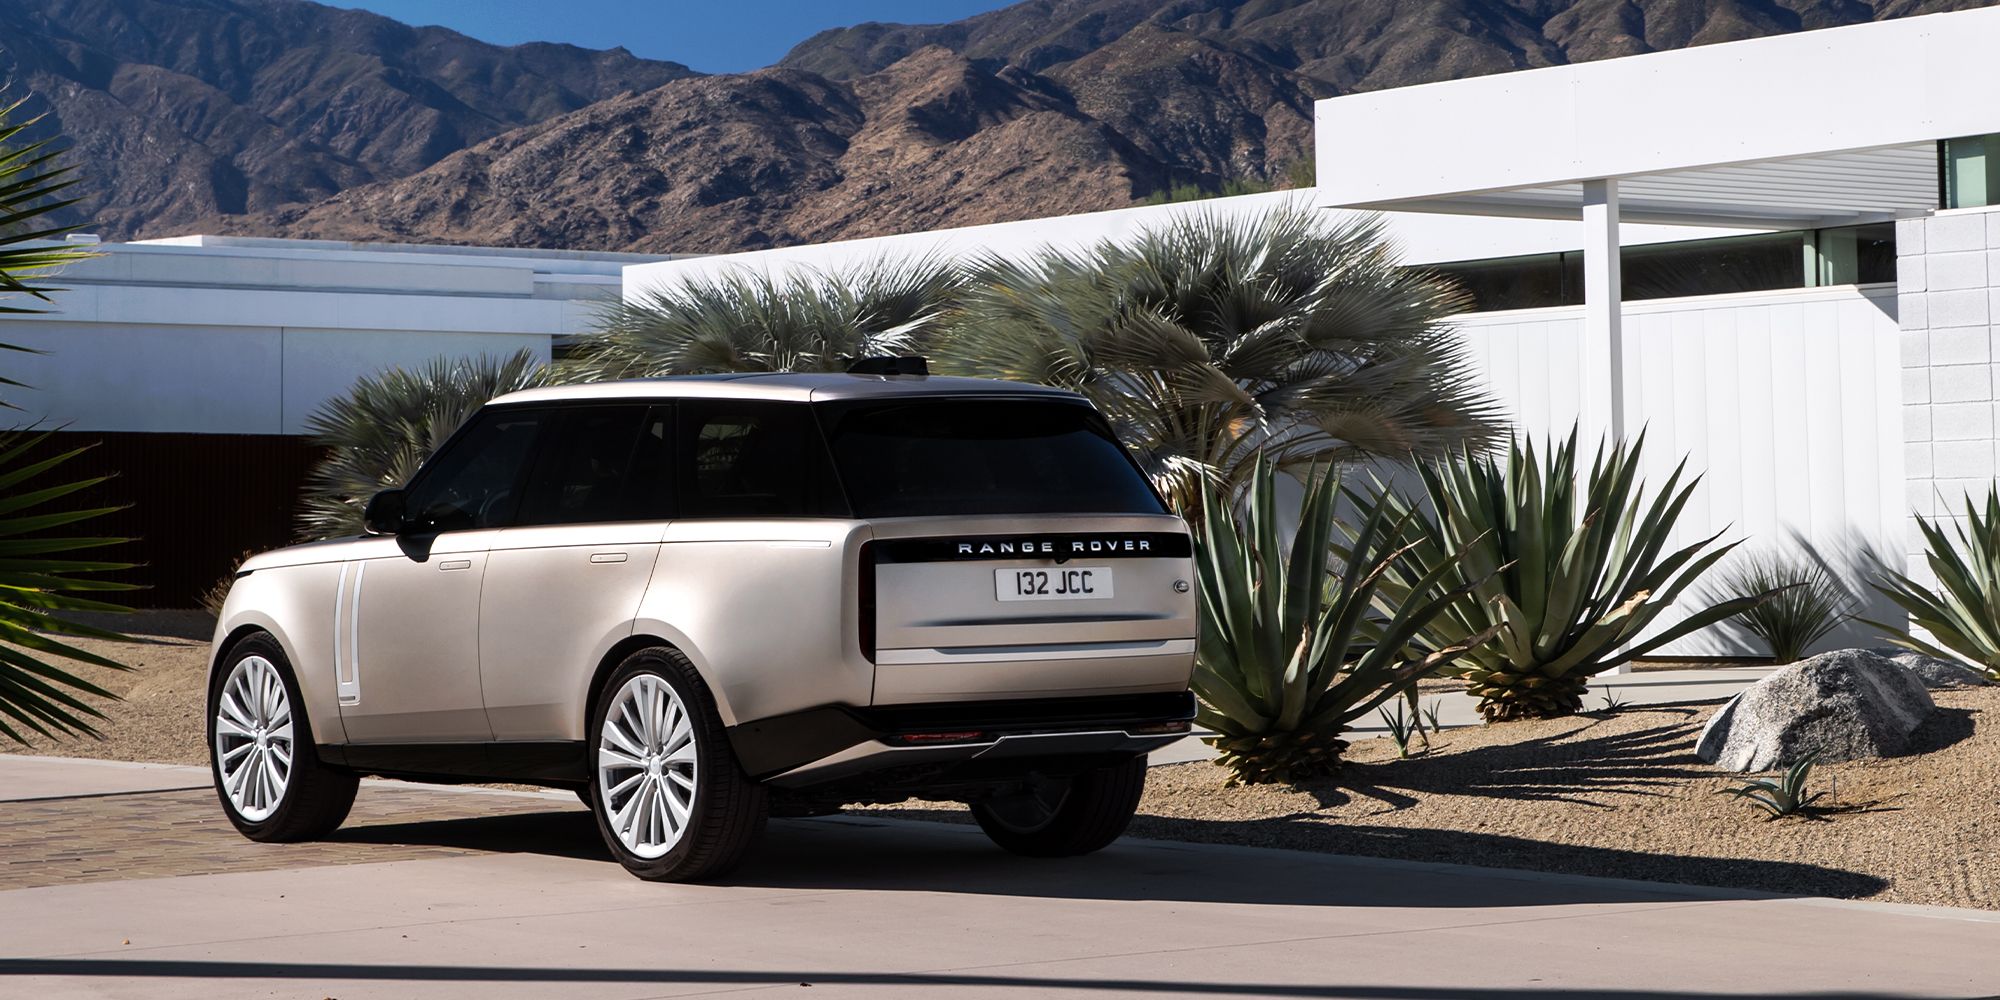 Rear 3/4 view of a silver Range Rover on a driveway